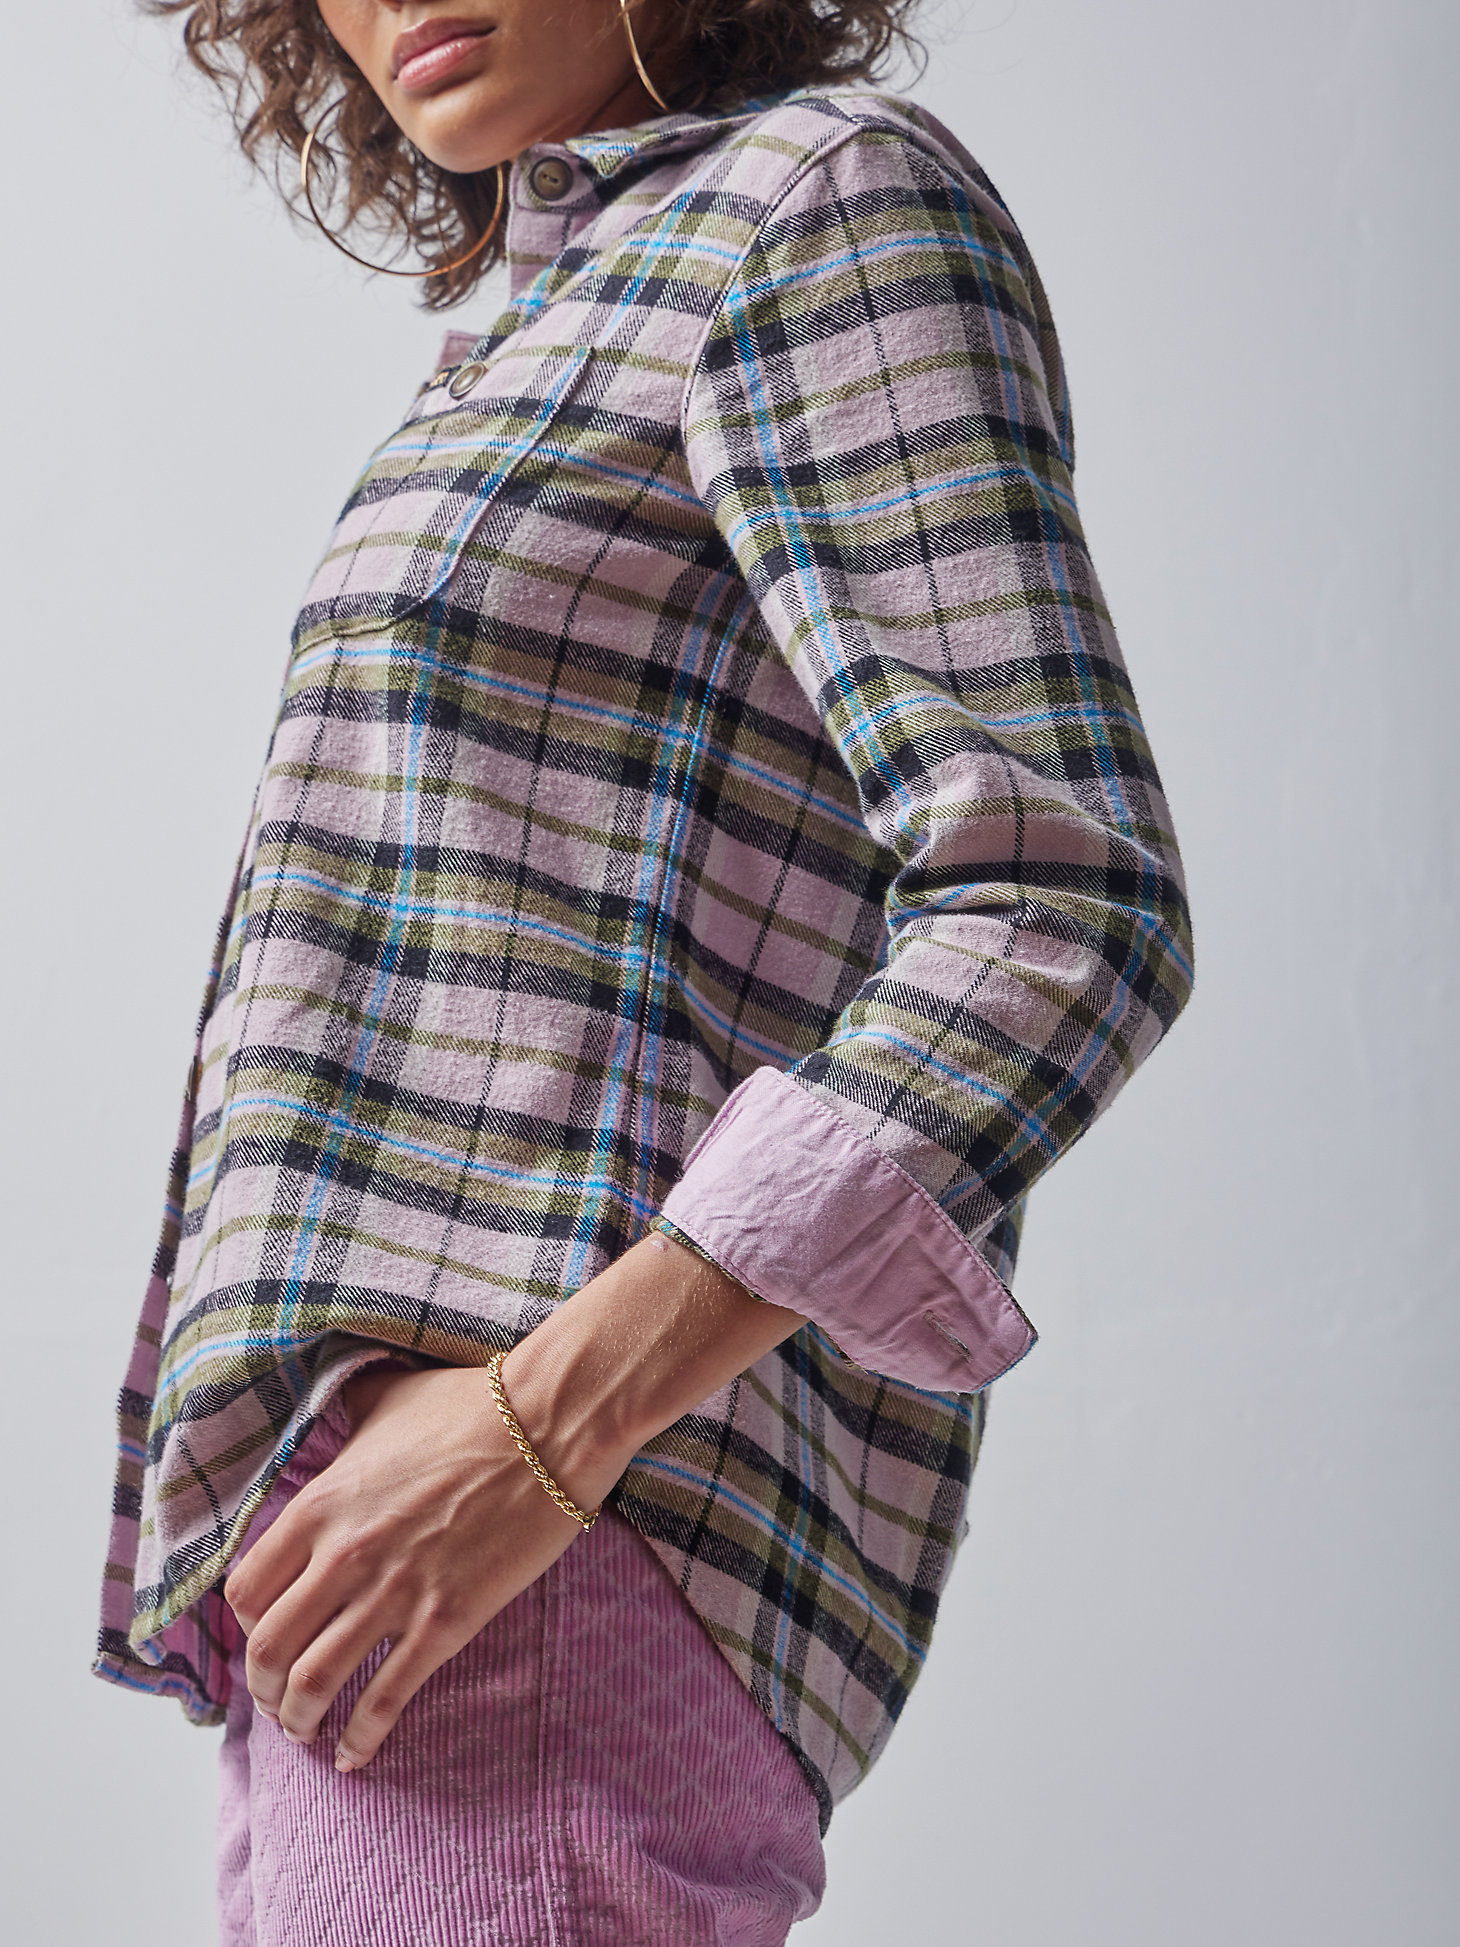 Women's Lee® x The Brooklyn Circus® Plaid Overshirt in Soft Misty Plaid alternative view 3